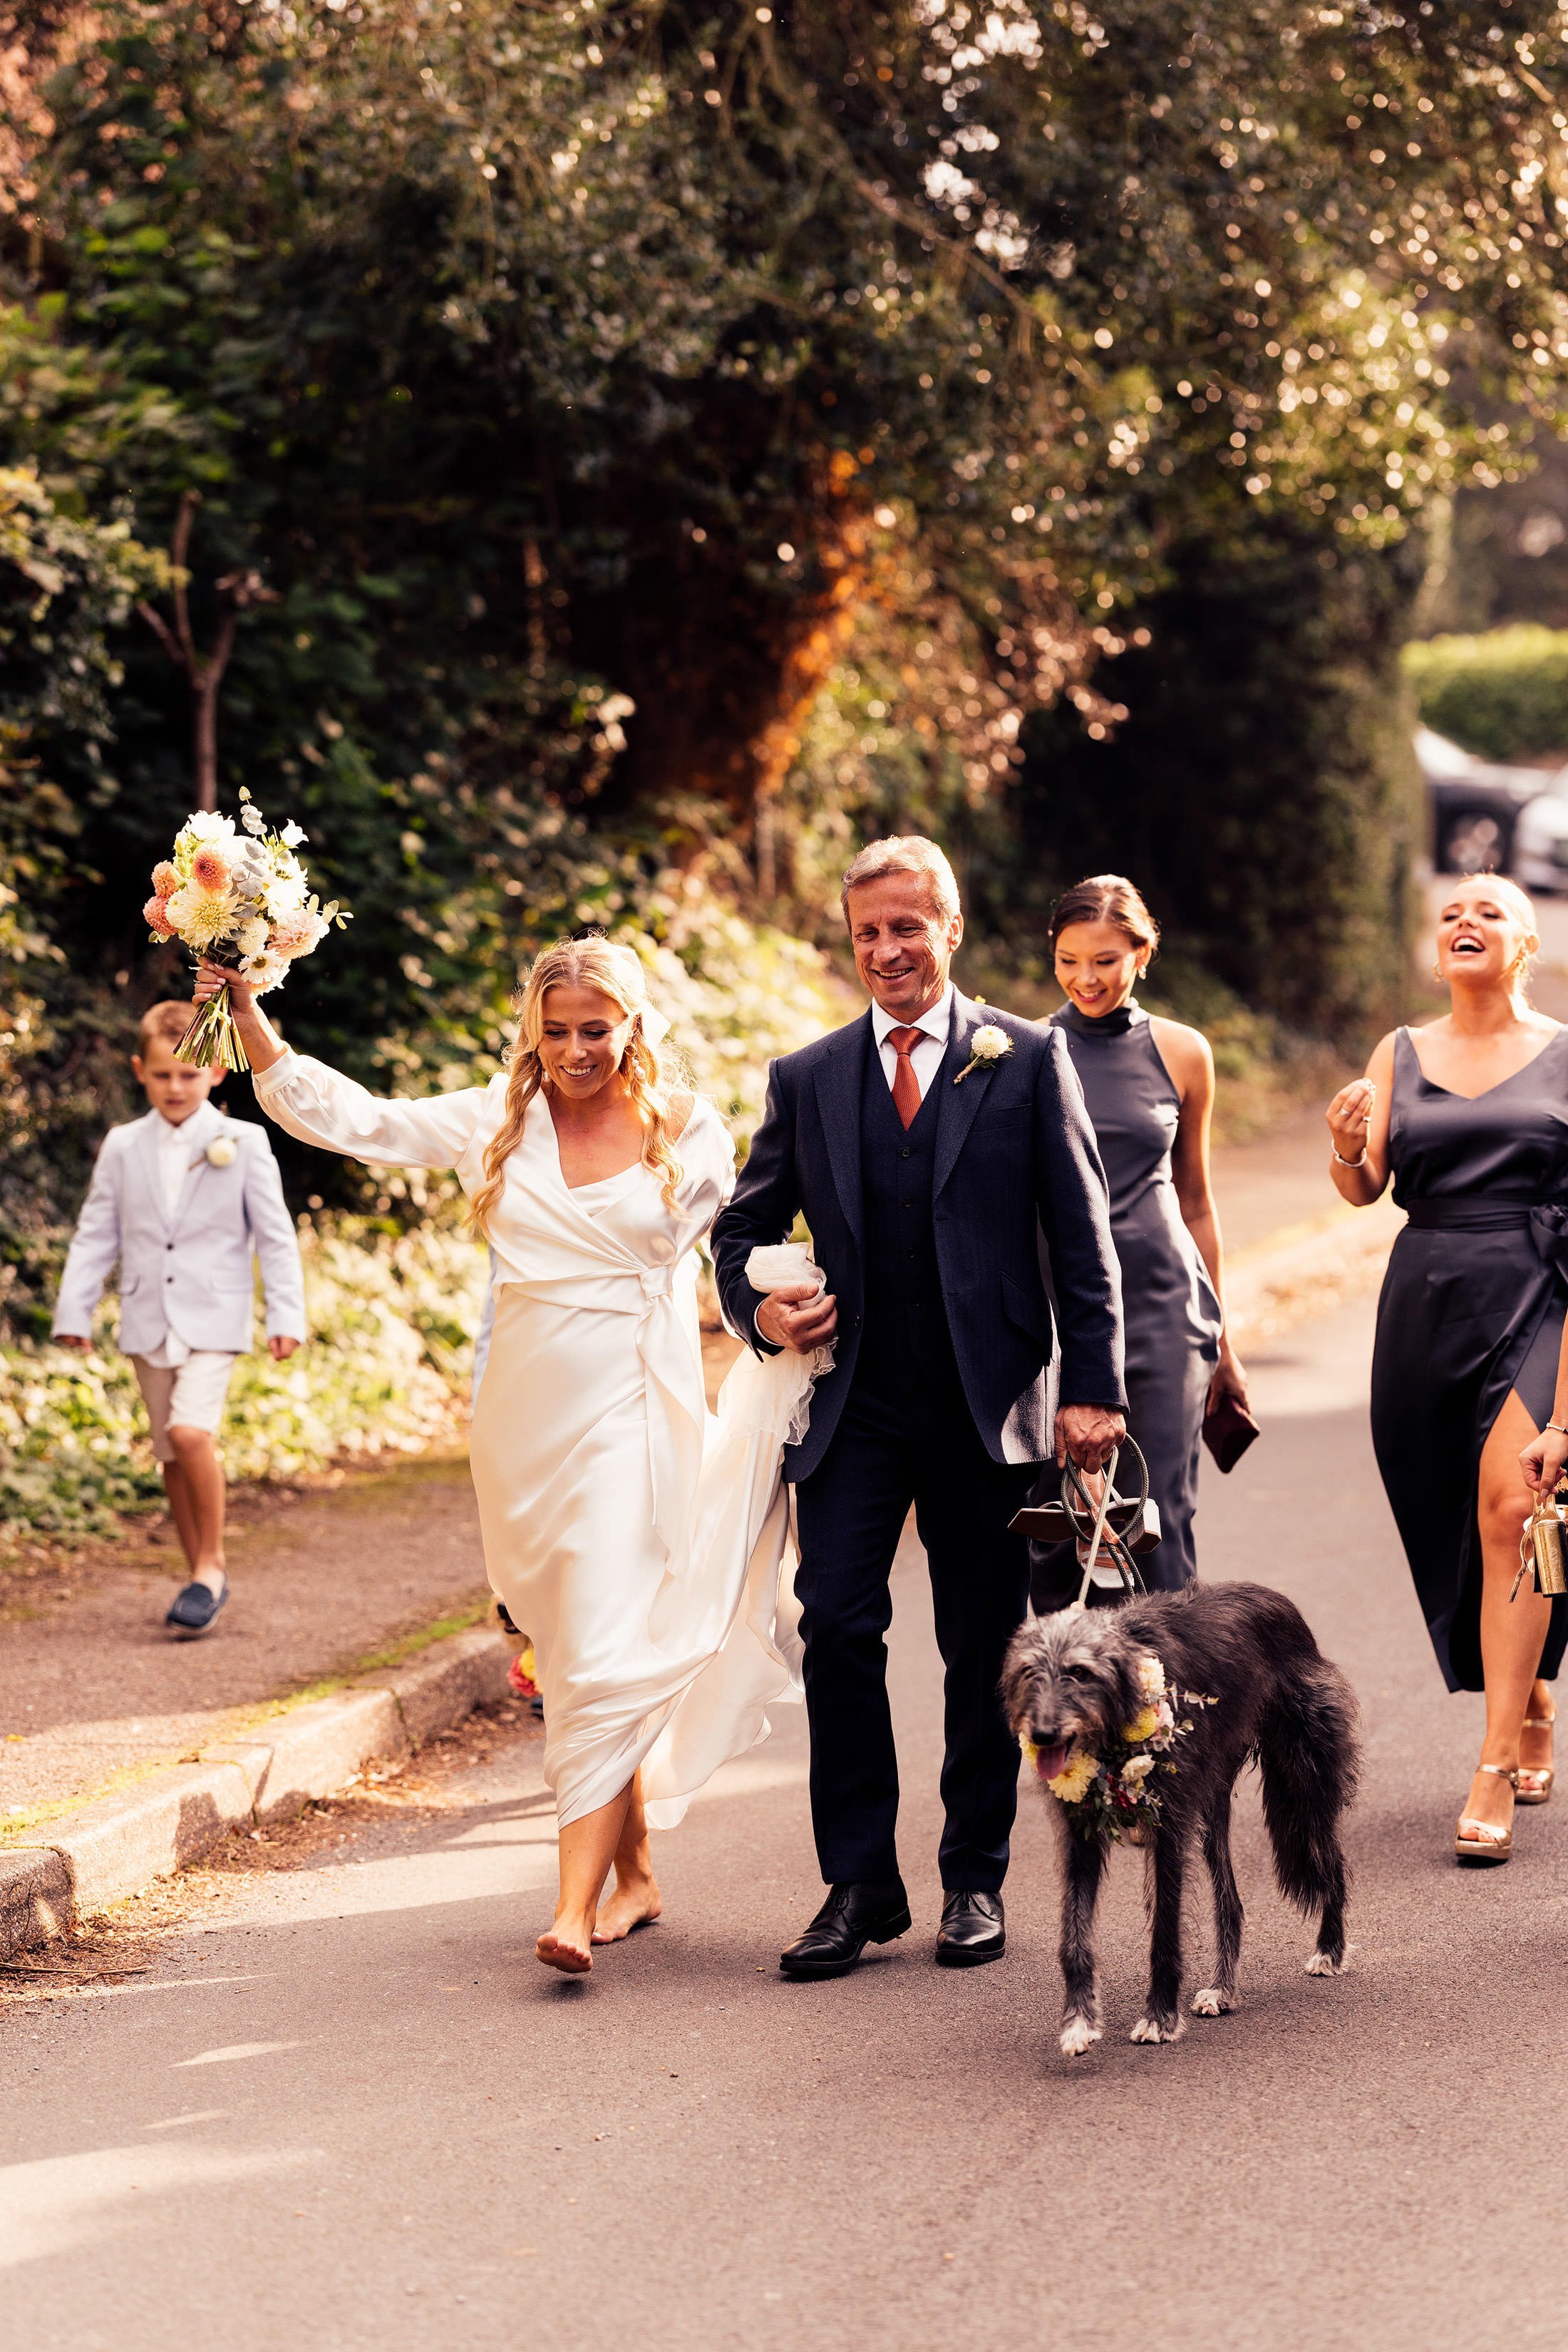 bridal party walk in street barefoot